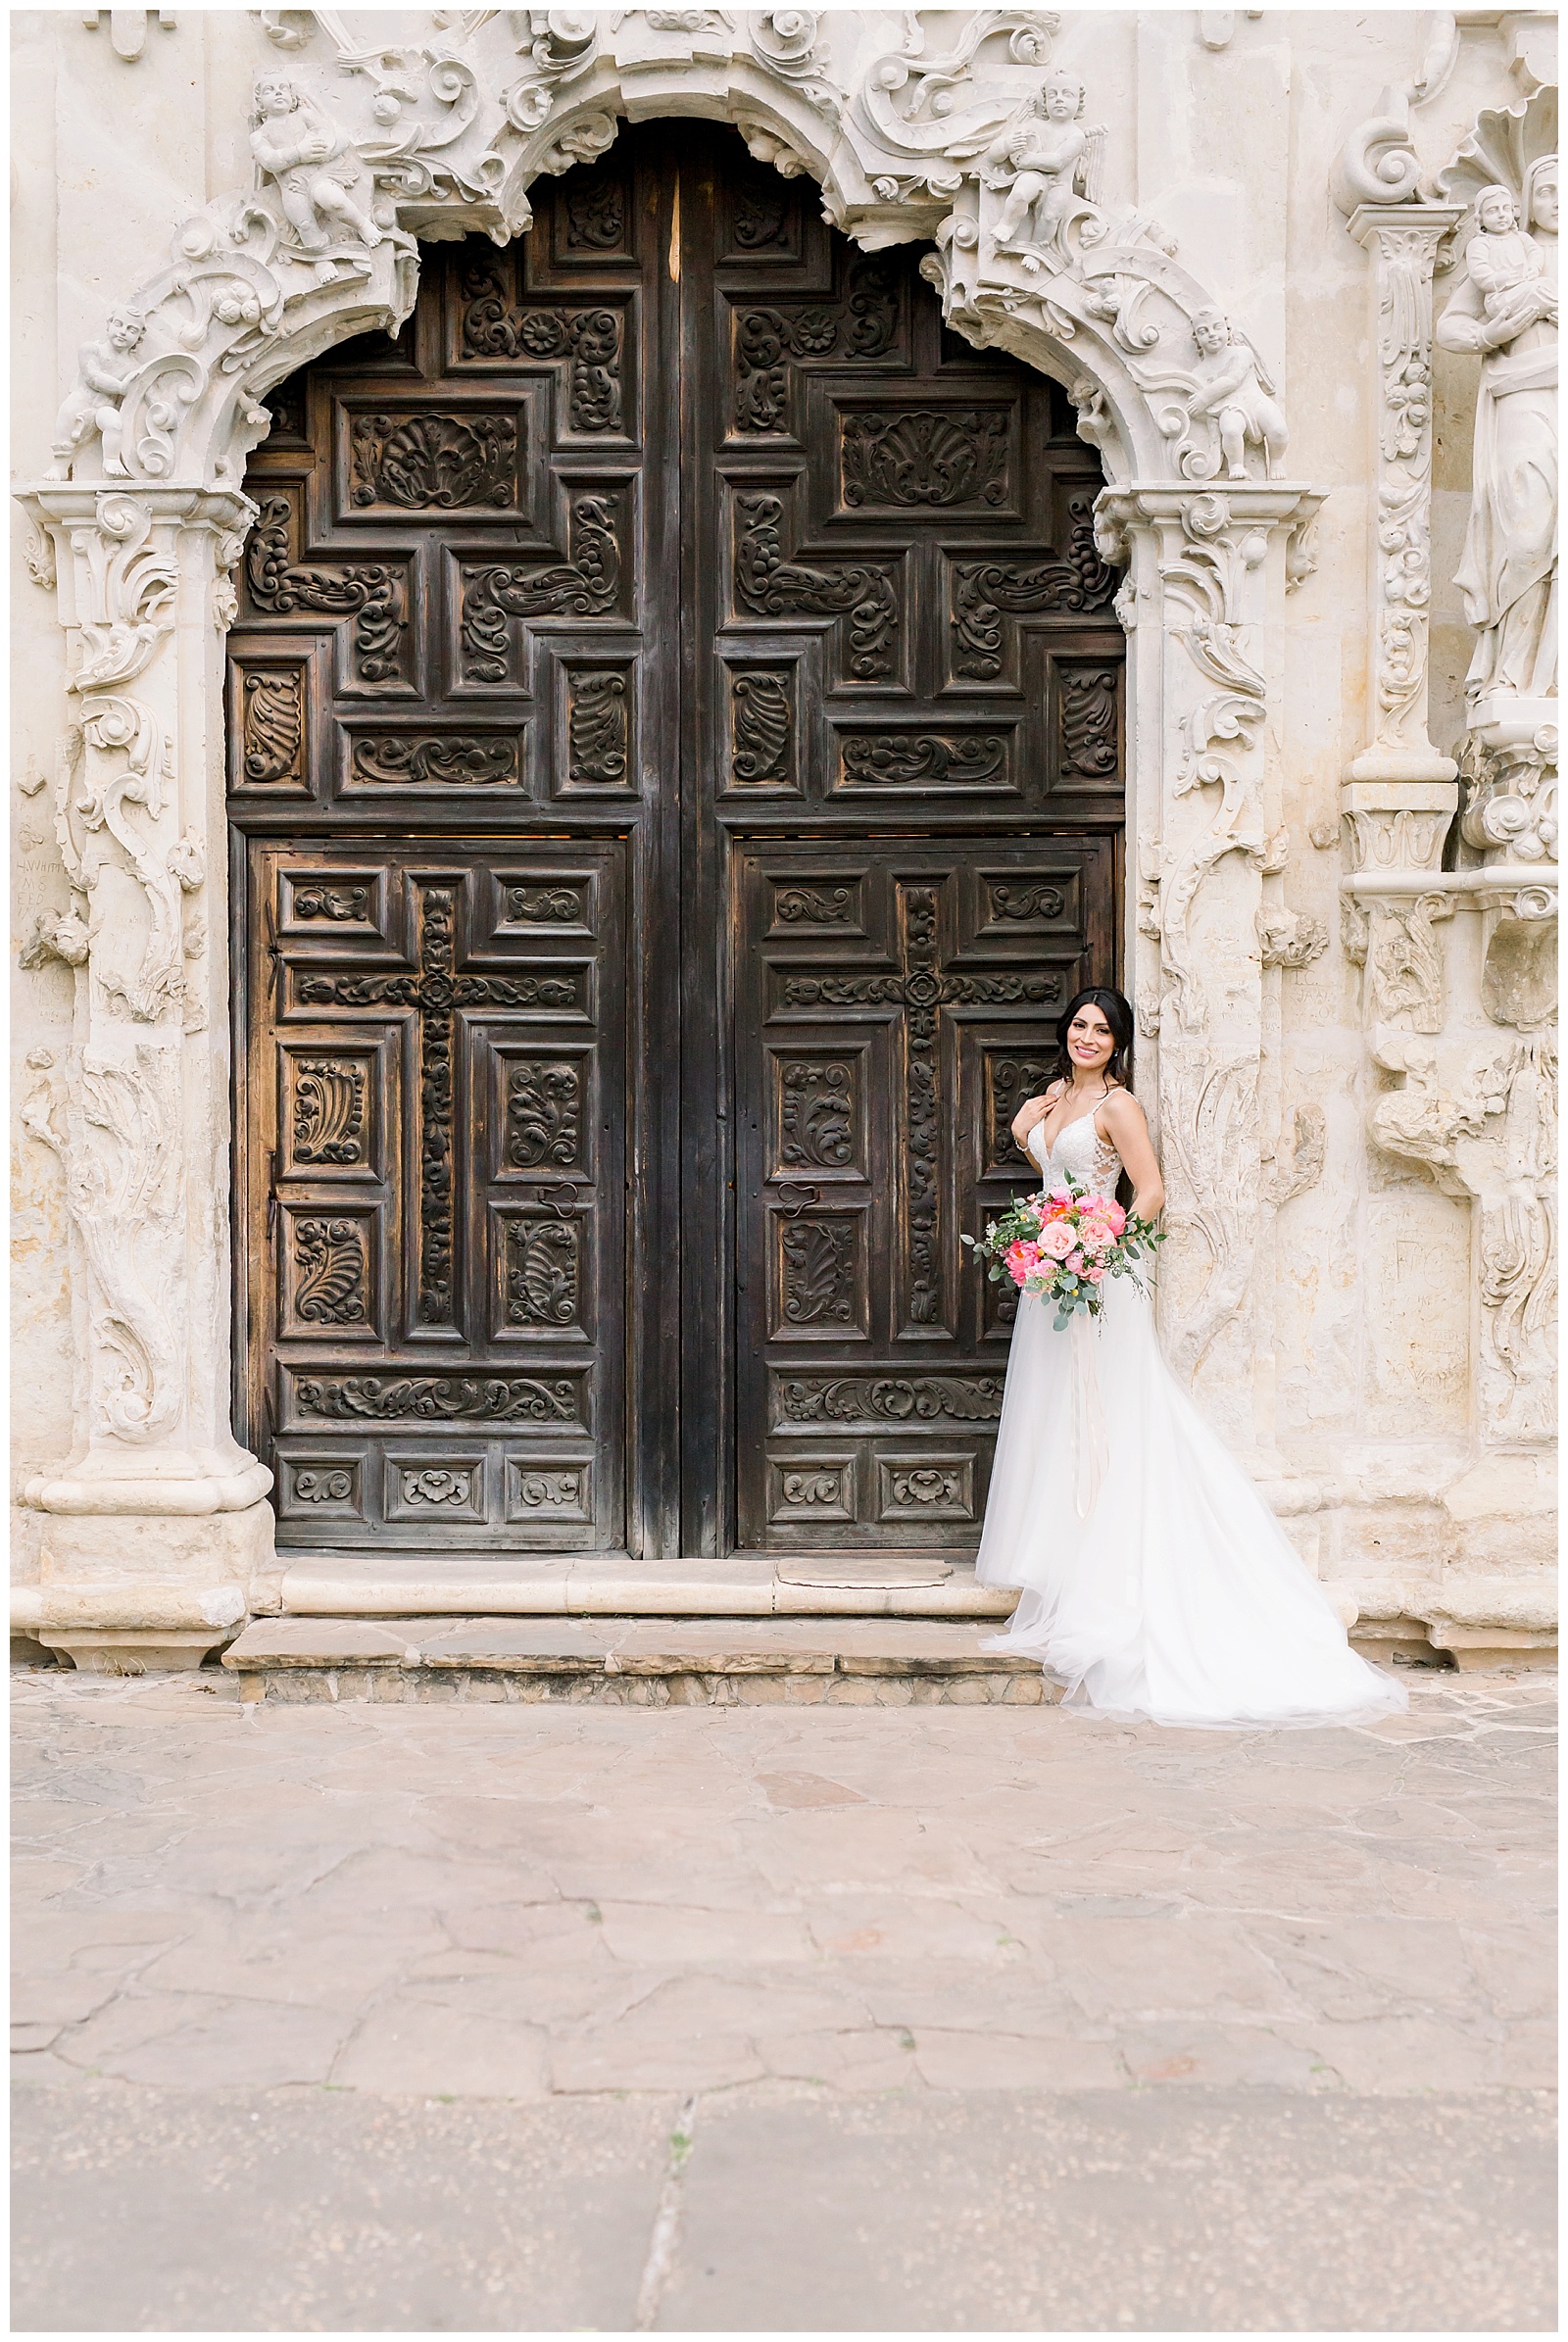 Bride in front of spanish missions doors for her Spanish Missions Bridal Portraits in San Antonio, TX with Monica Roberts Photography | www.monicaroberts.com